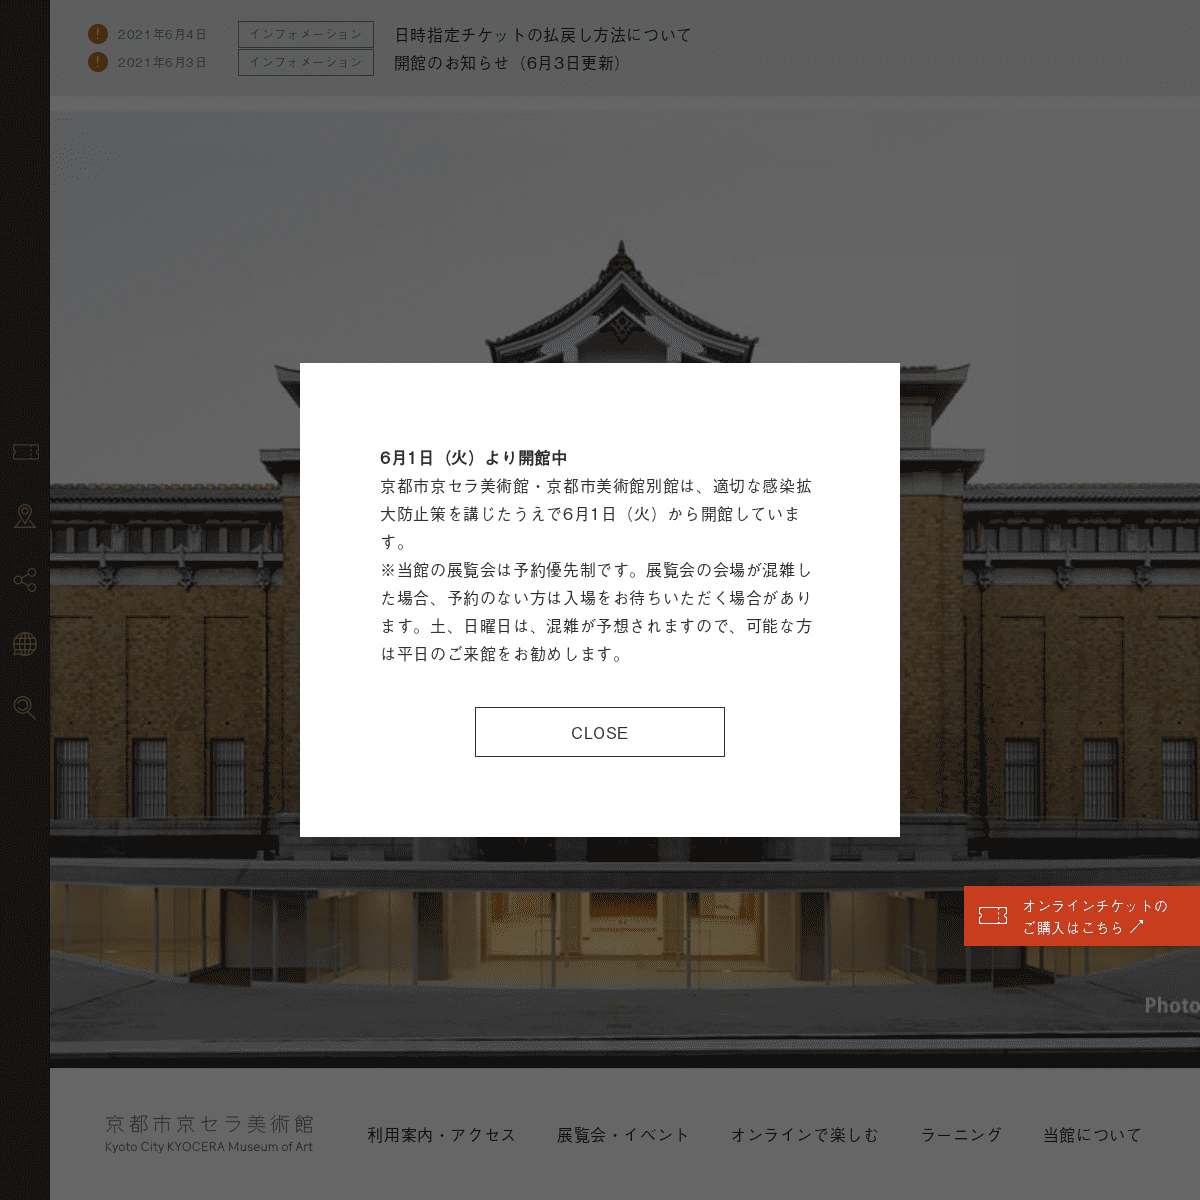 A complete backup of https://kyotocity-kyocera.museum